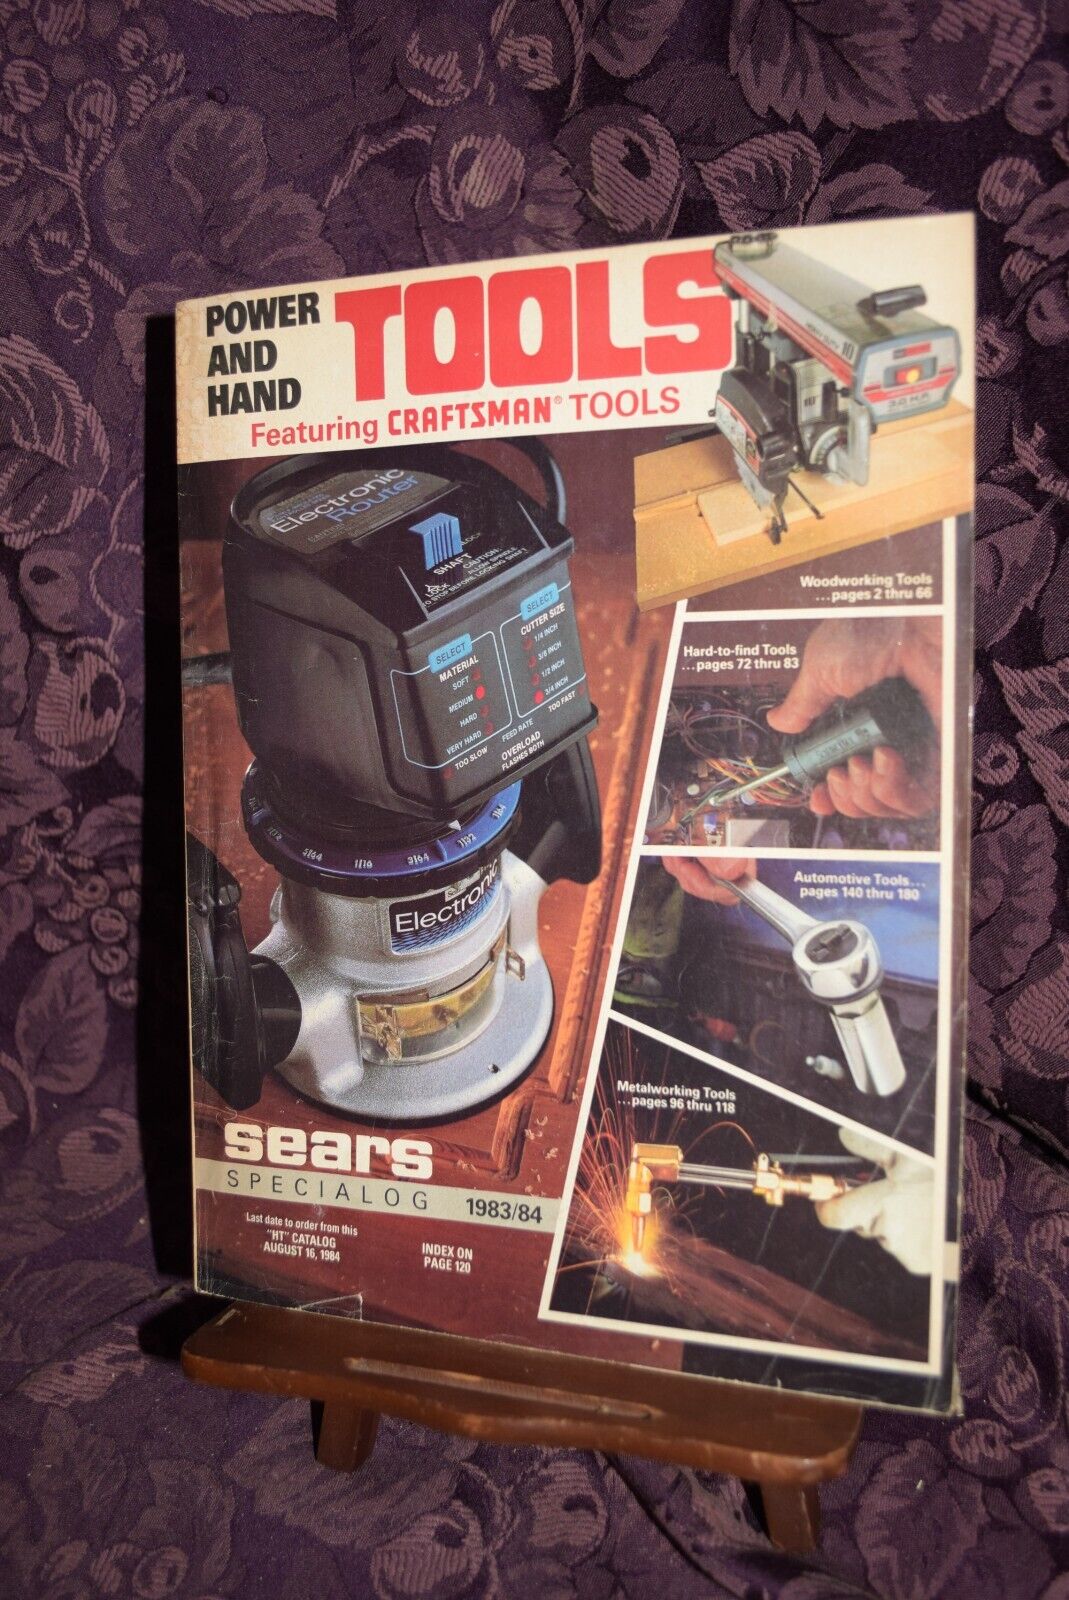 1983/84 Sears Specialog Power and Hand Tools Craftsman CATALOG 179 Pages